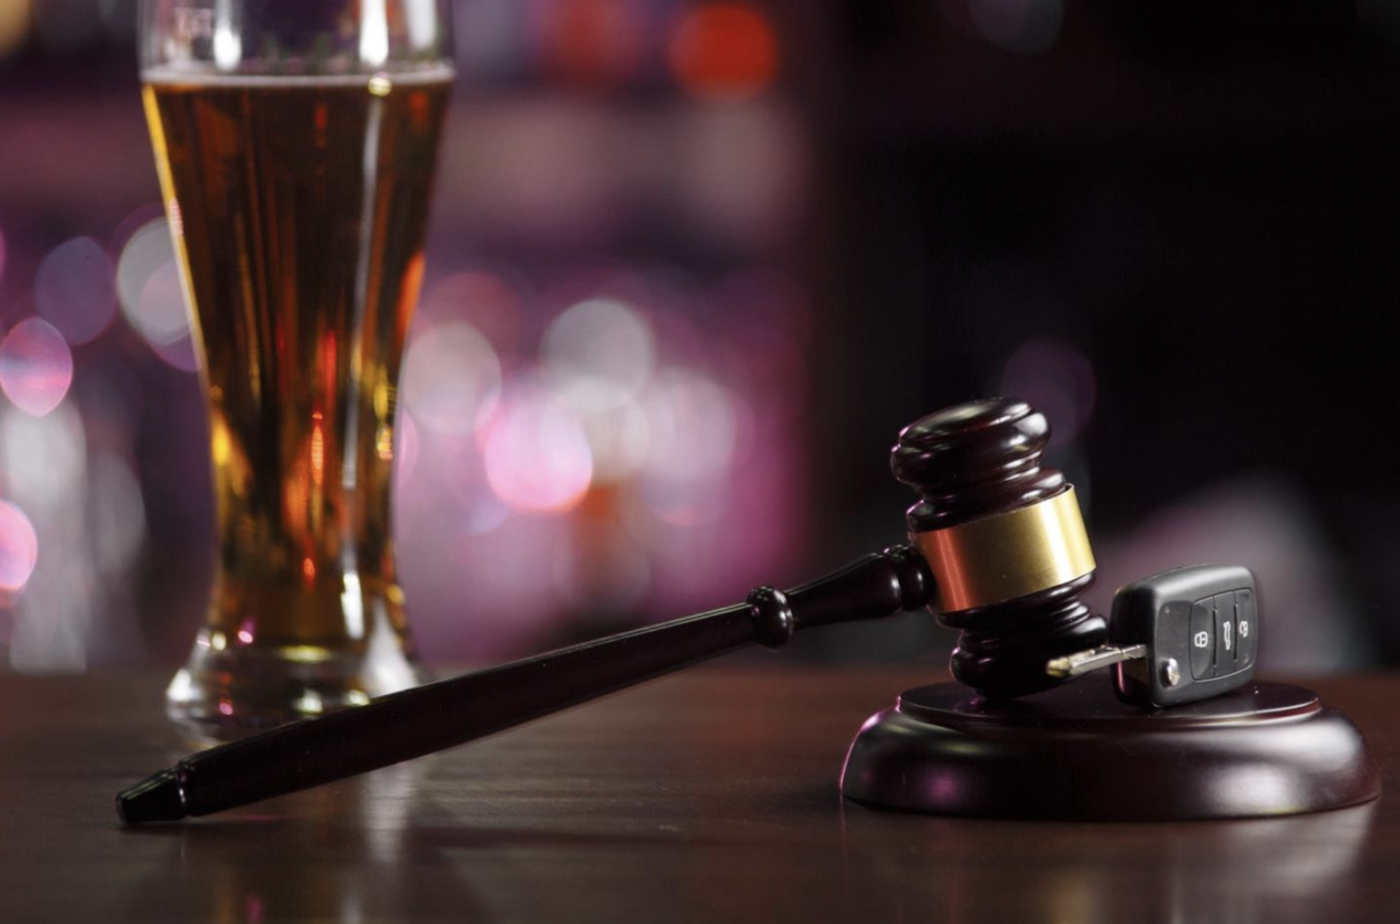 A wooden gavel beside a car key on a bar with a glass of beer in the background, symbolizing the potential impact of DUI charges on professional licensing and legal responsibilities.